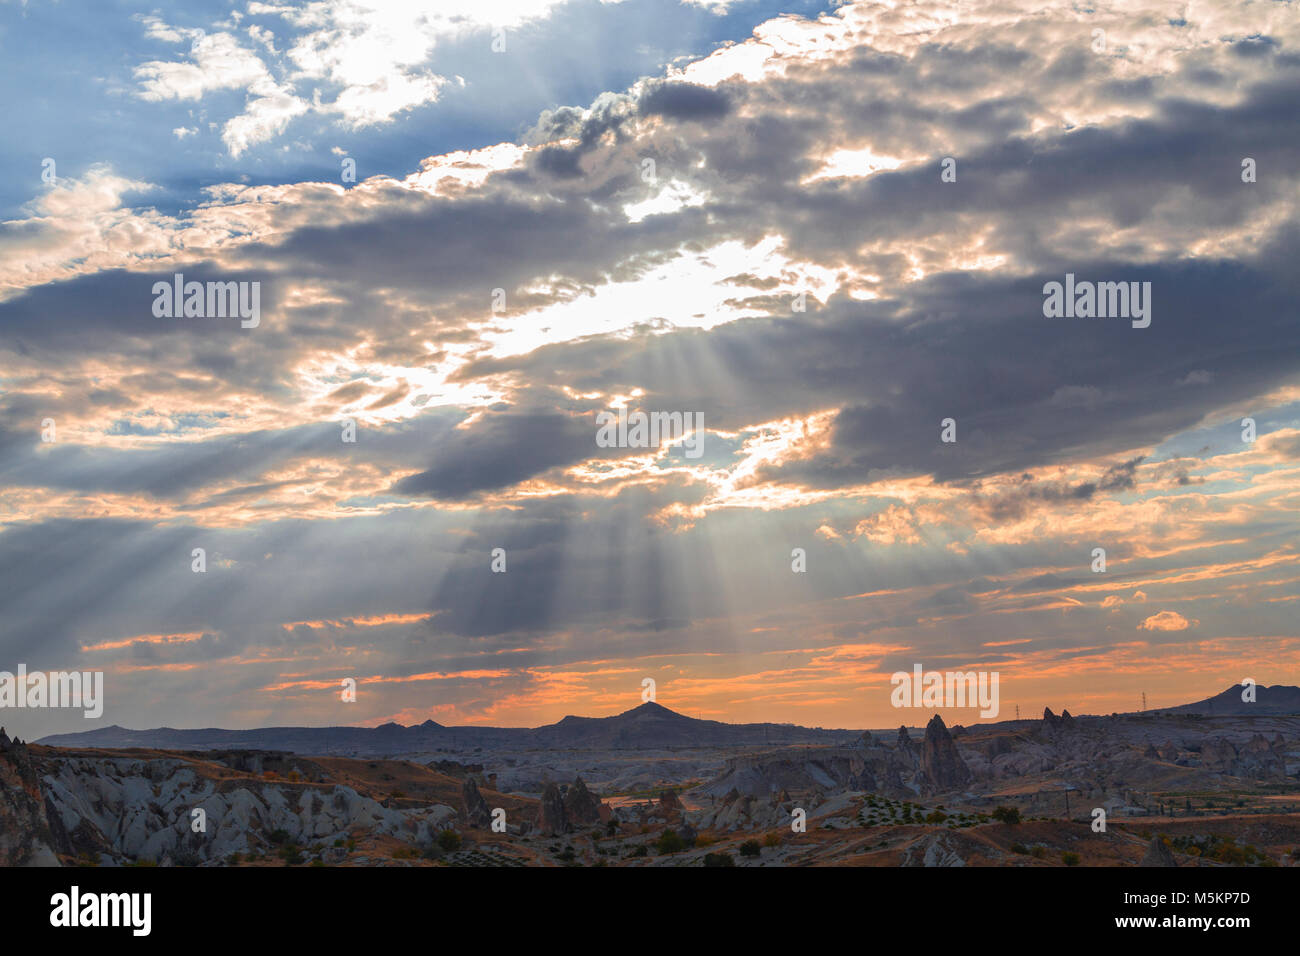 Dramatic sky and clouds in Cappadocia, Turkey Stock Photo